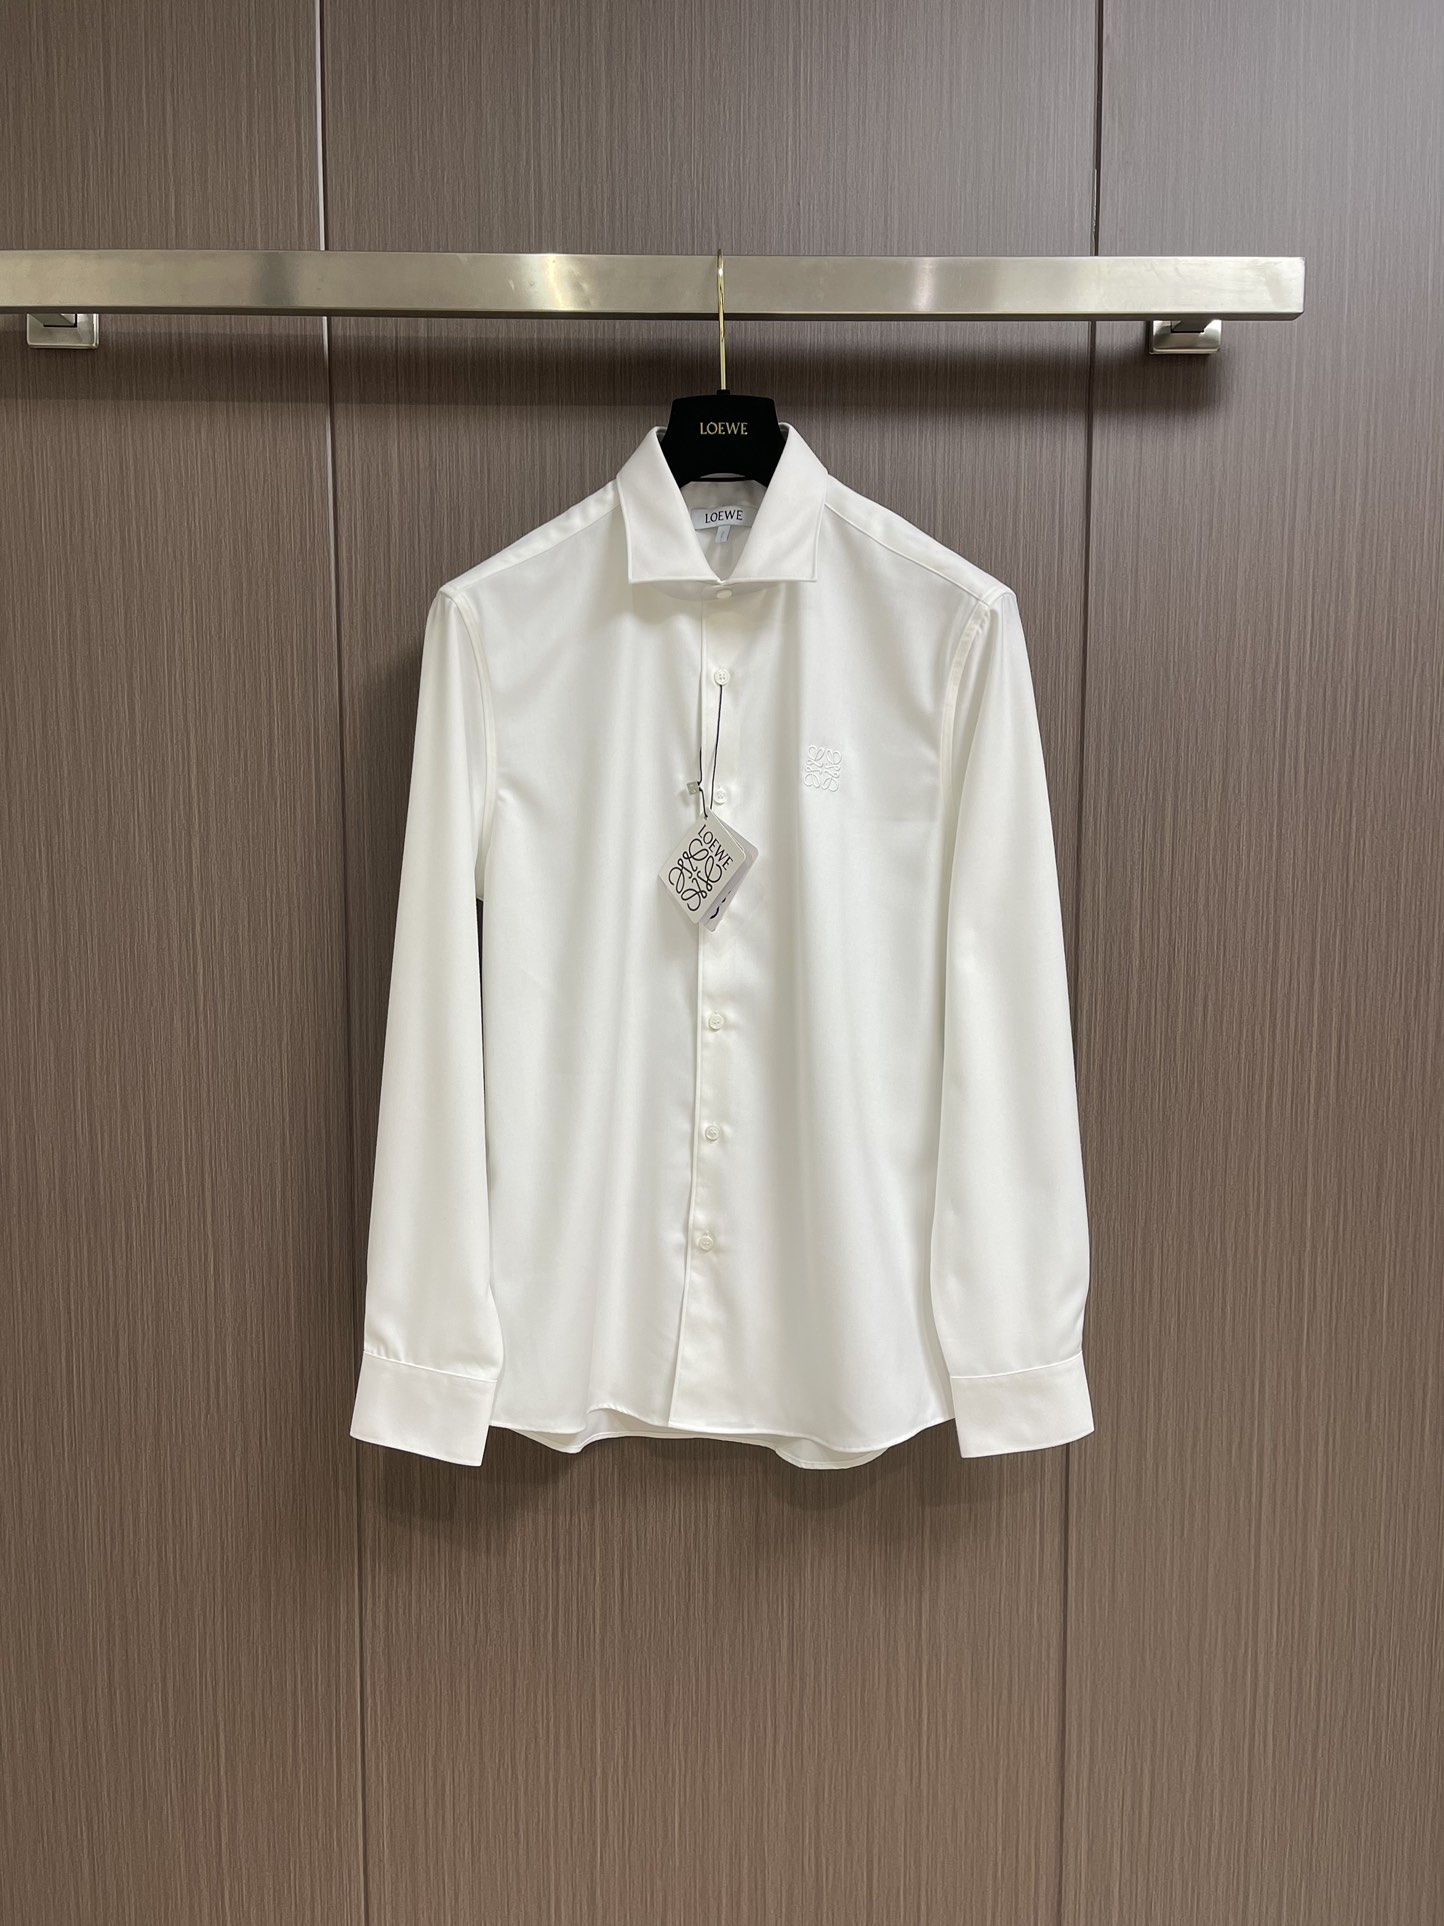 Loewe Clothing Shirts & Blouses Embroidery Fall Collection